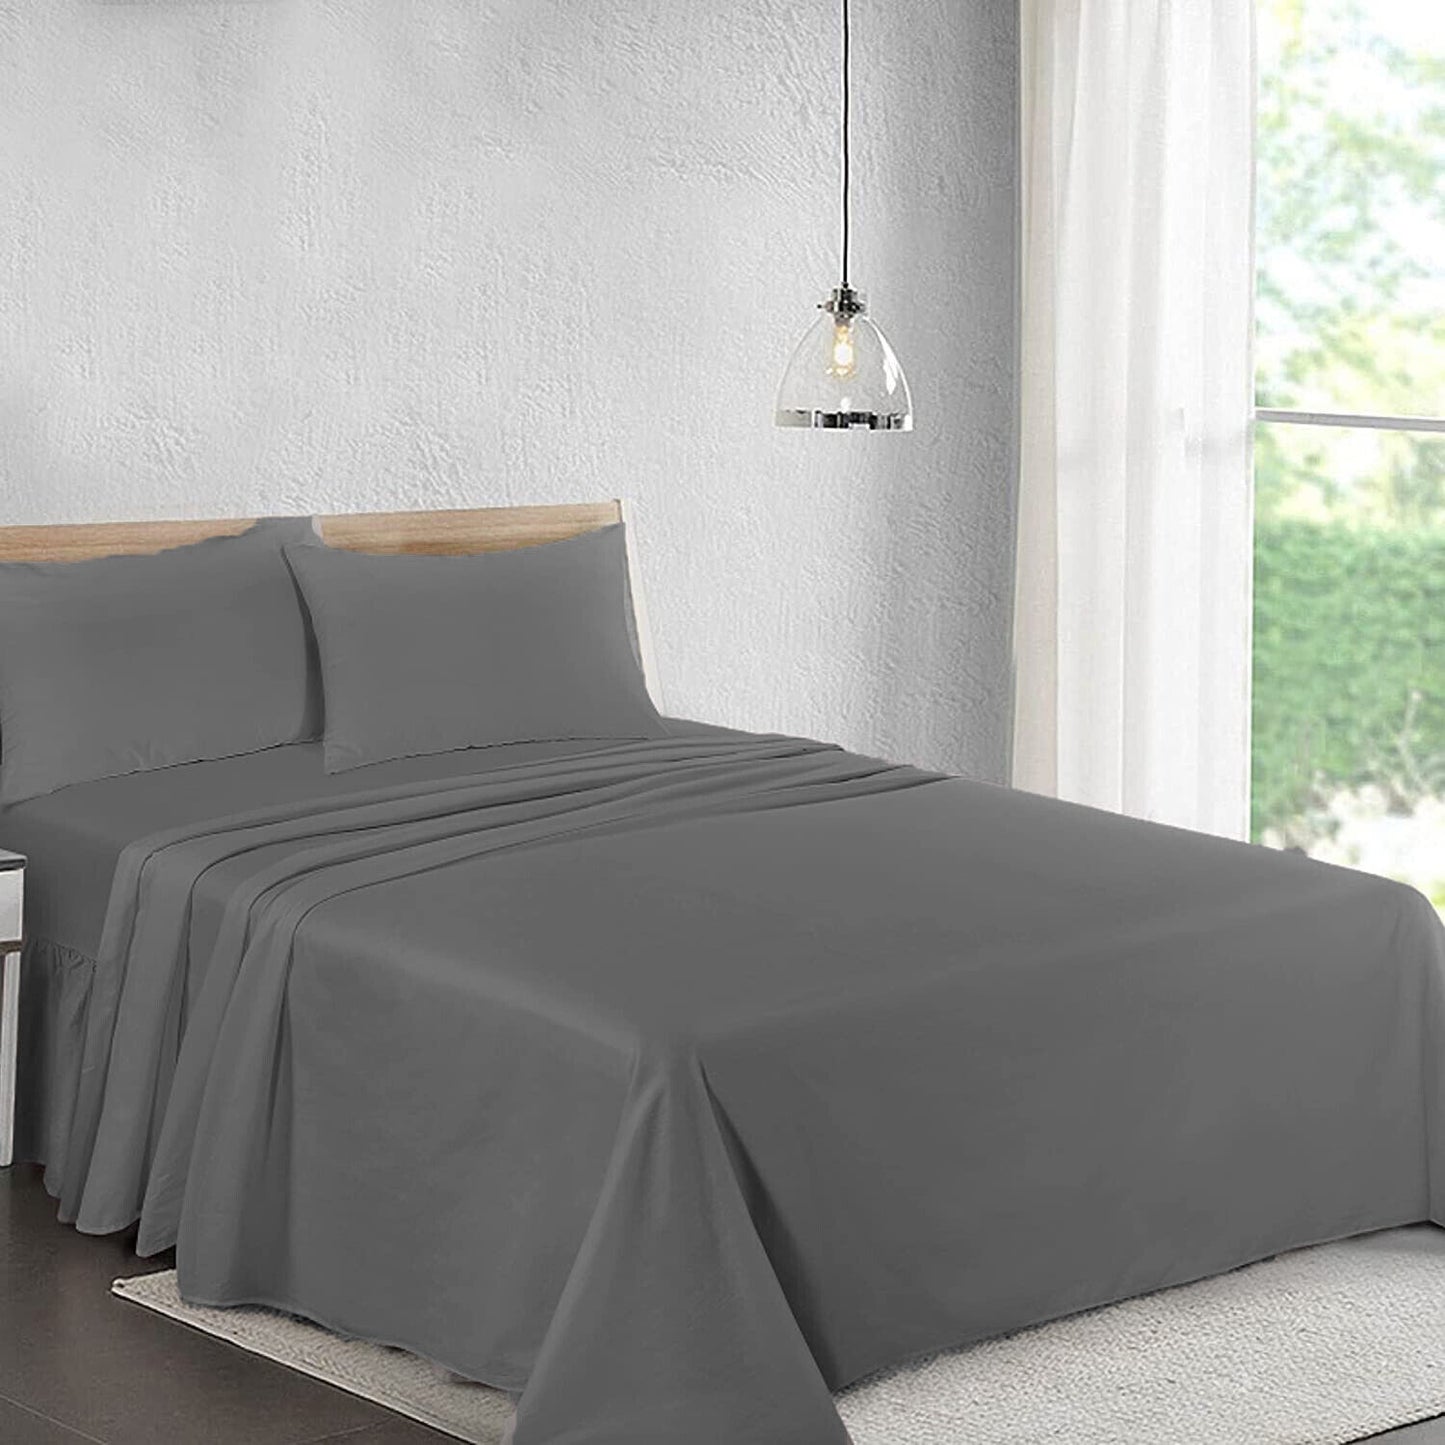 Hotel Quality Flat Sheet 100% Egyptian Cotton 200TC Flat Bed Sheets Soft & Comfortable ⭐⭐⭐⭐⭐